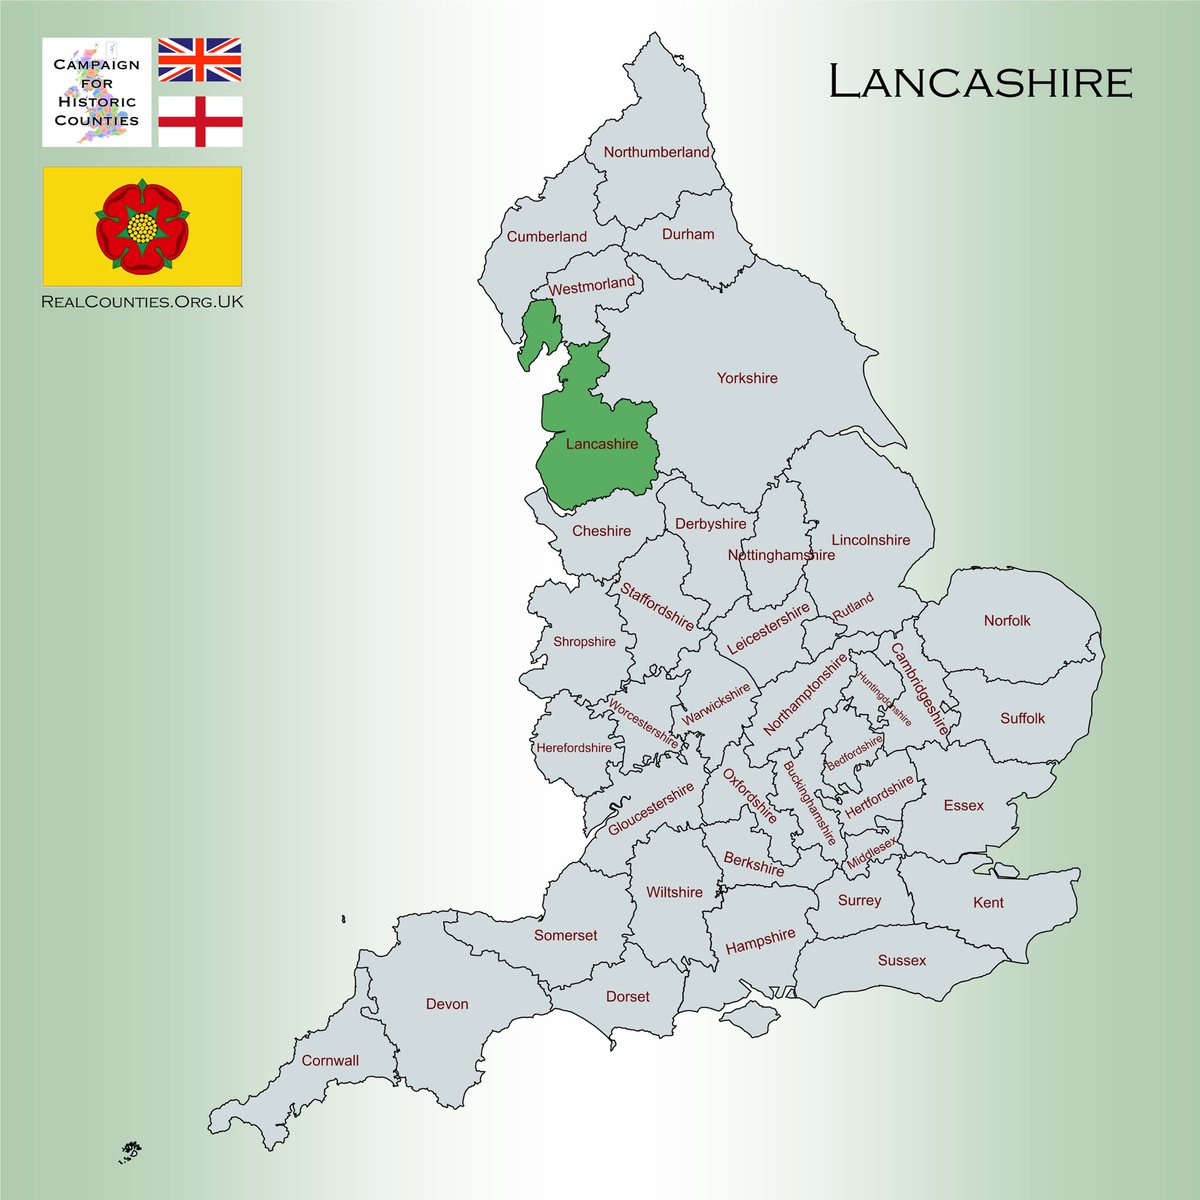 The County Palatine of #Lancaster is a shire along the Irish Sea Coast. The County of Lancaster was first recorded in 1168 under King Henry II. #Lancashire stretches from the River Mersey in the south to the Furness Fells in the north. 🇬🇧 #HistoricCounties | #RealCounties 🏴󠁧󠁢󠁥󠁮󠁧󠁿